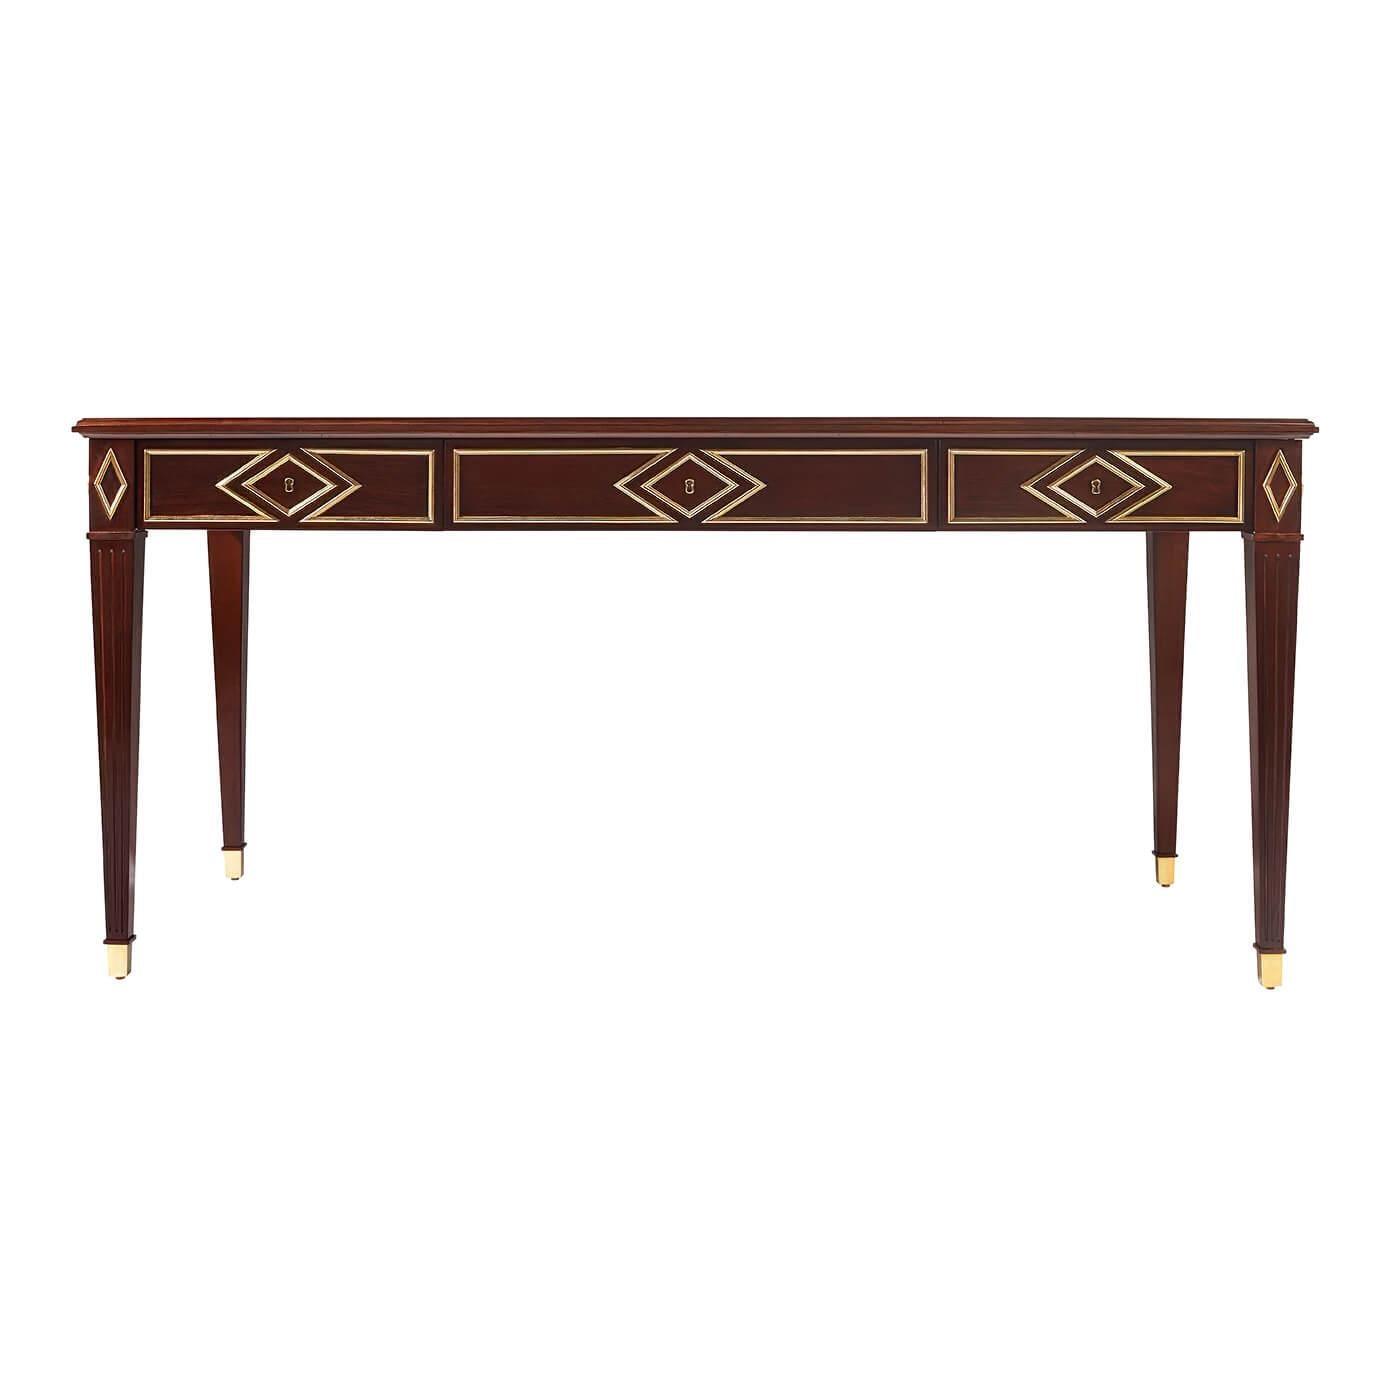 A Russian neoclassic style desk with brass details on the frieze in a classic diamond pattern influenced by 19th century Russian designs, with an inset leather top writing surface and rasied on square tapered and fluted legs.

Dimensions: 65